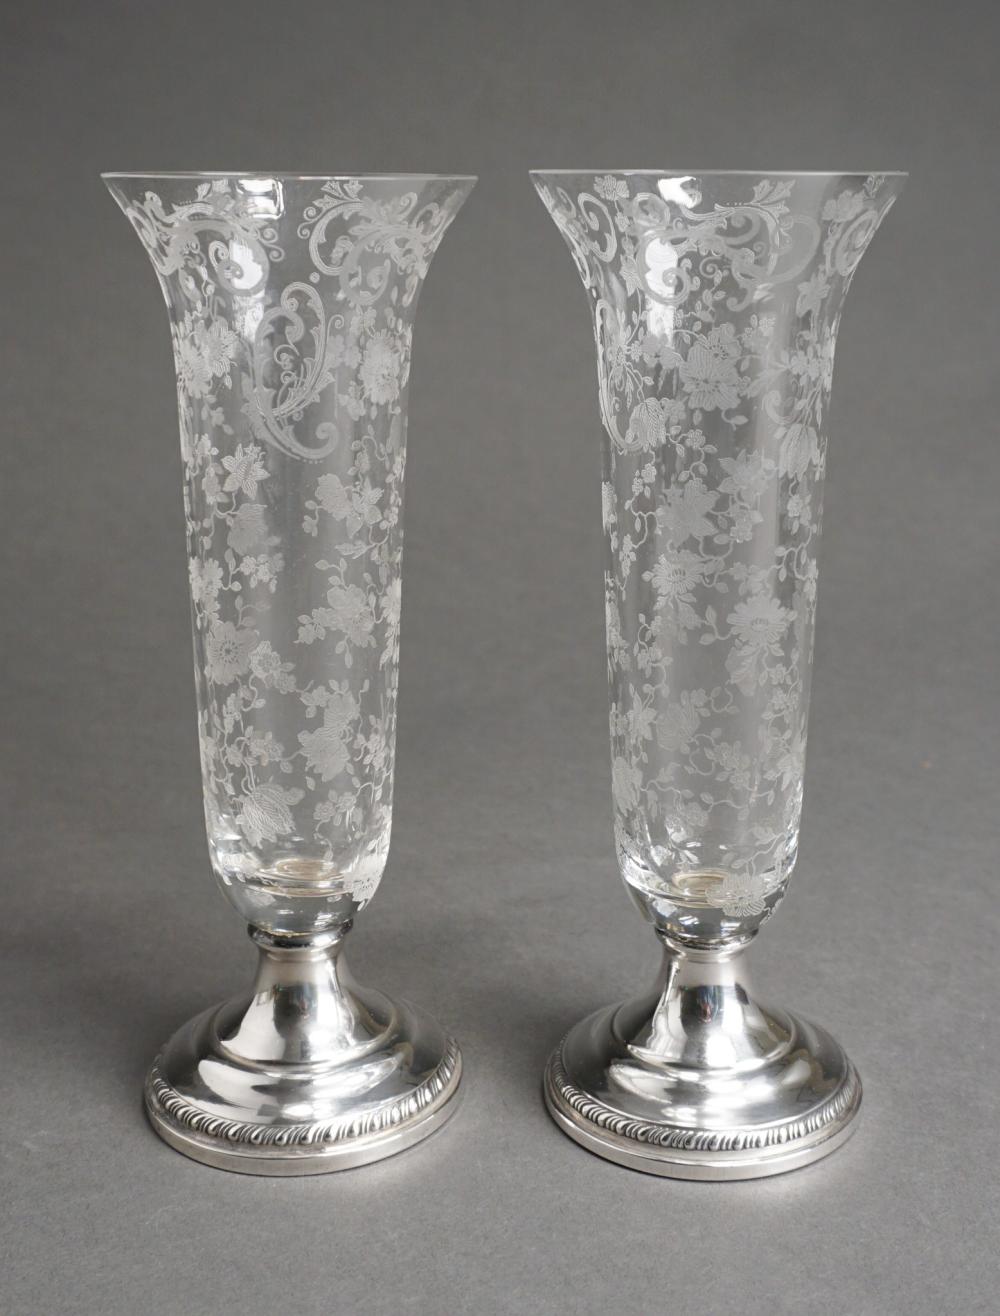 PAIR CAMBRIDGE WEIGHTED STERLING